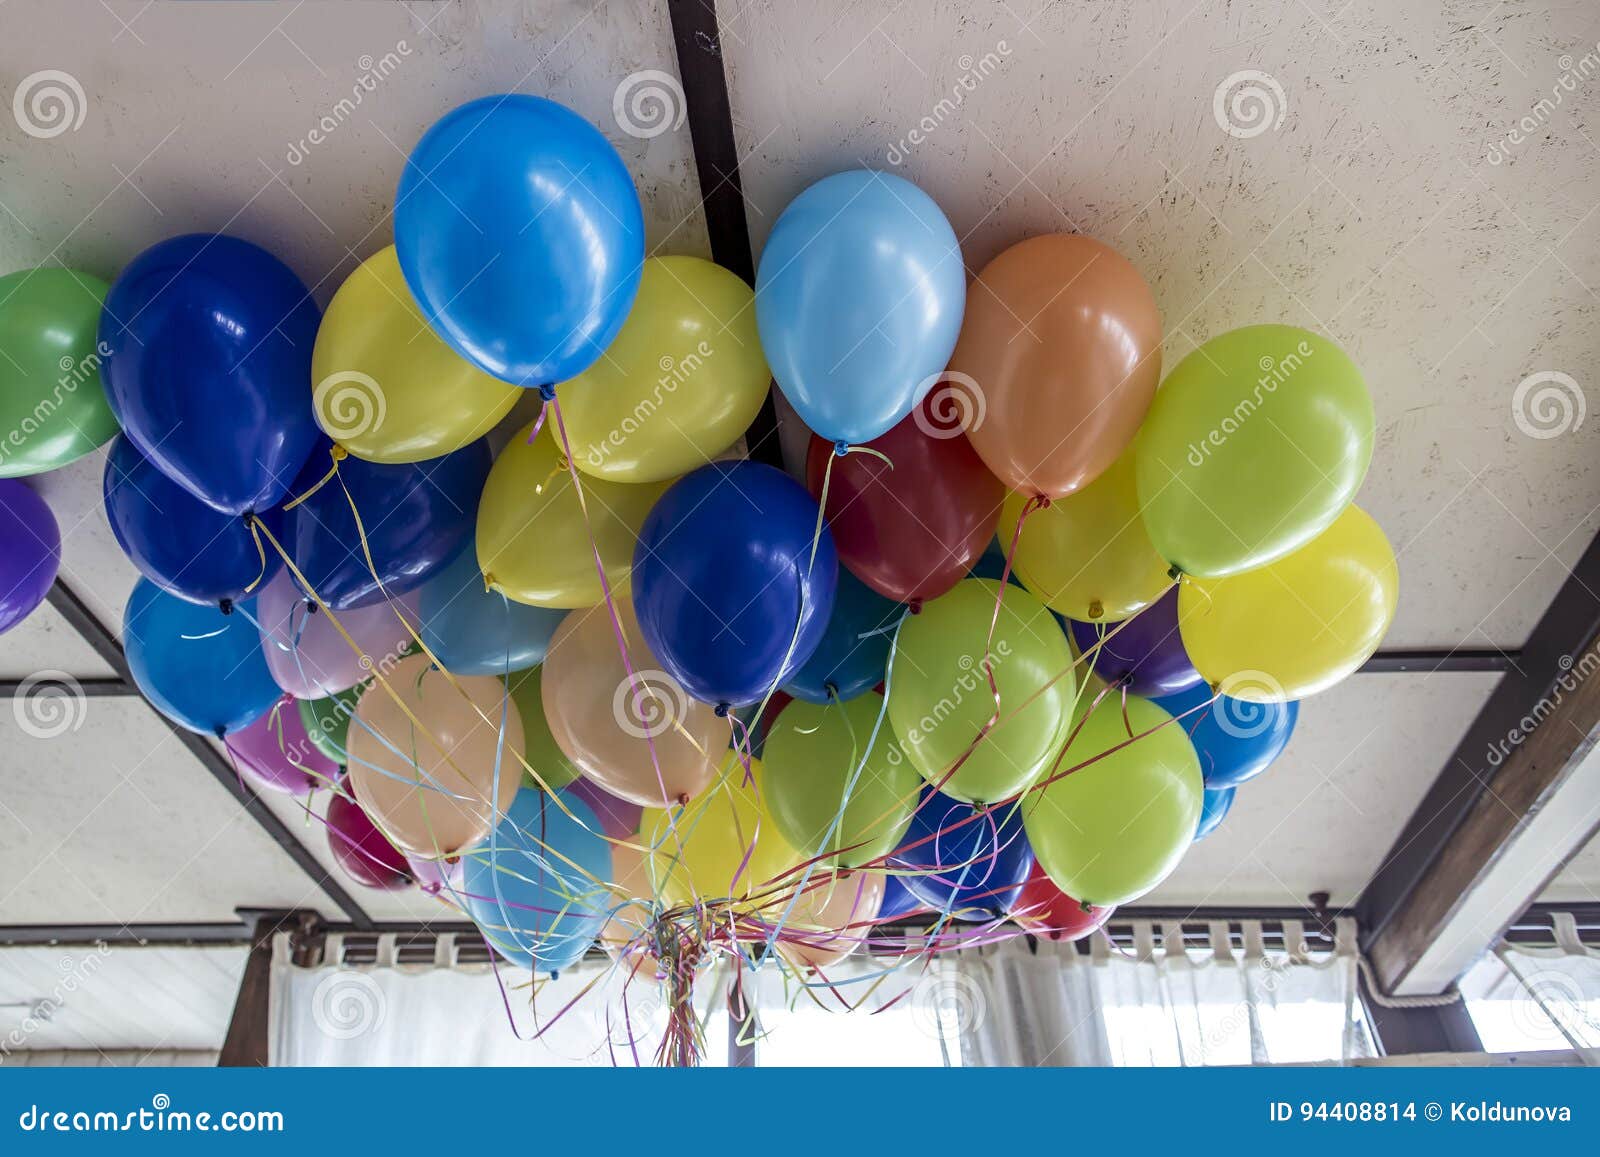 Beam Of Bright Beautiful Balloons On The Ceiling Stock